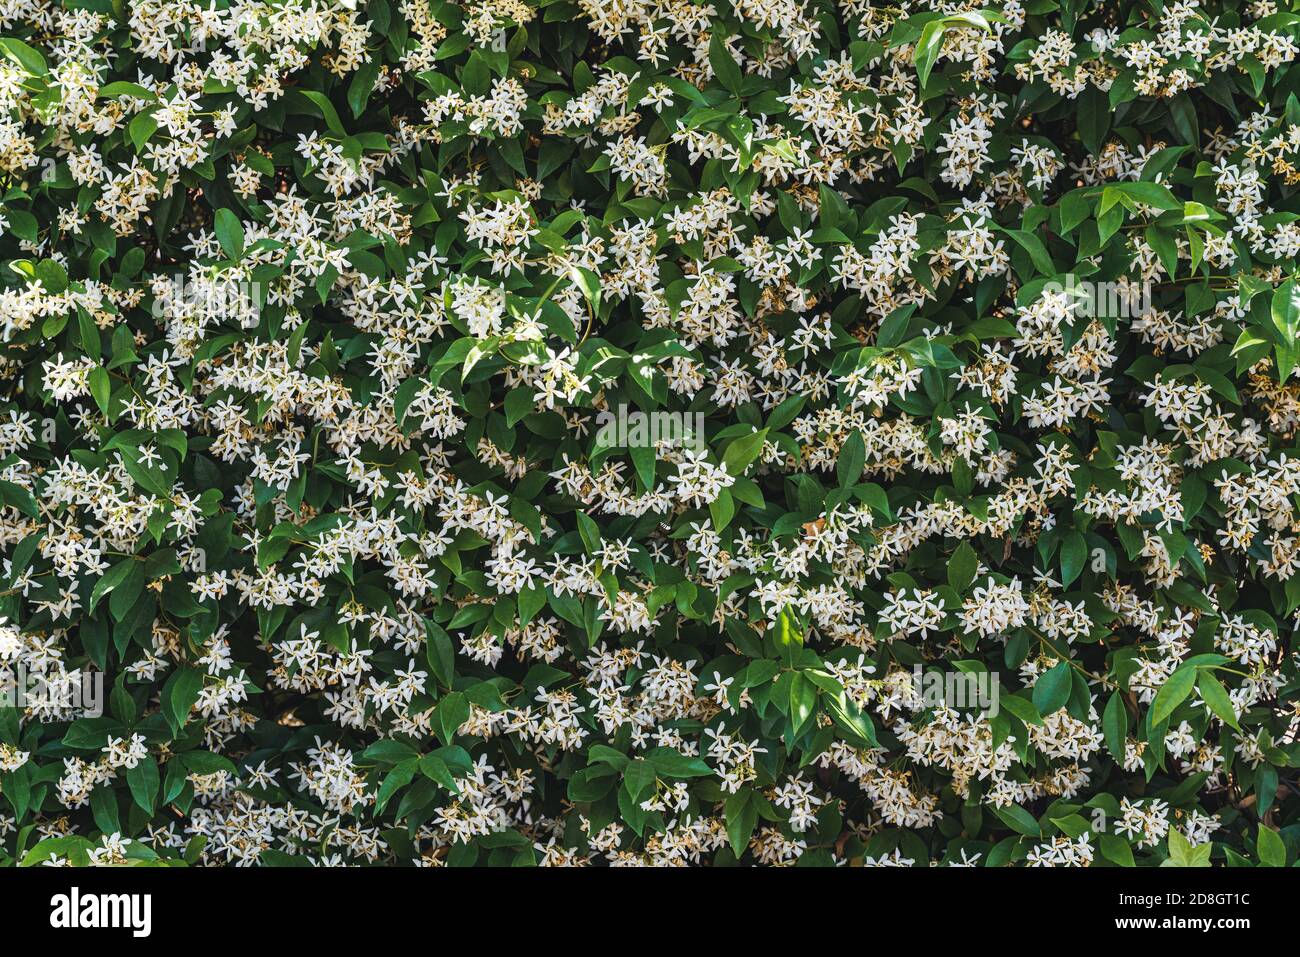 White flowers among green leaves of Trachelospermum jasminoides commonly known as Star jasmine Stock Photo